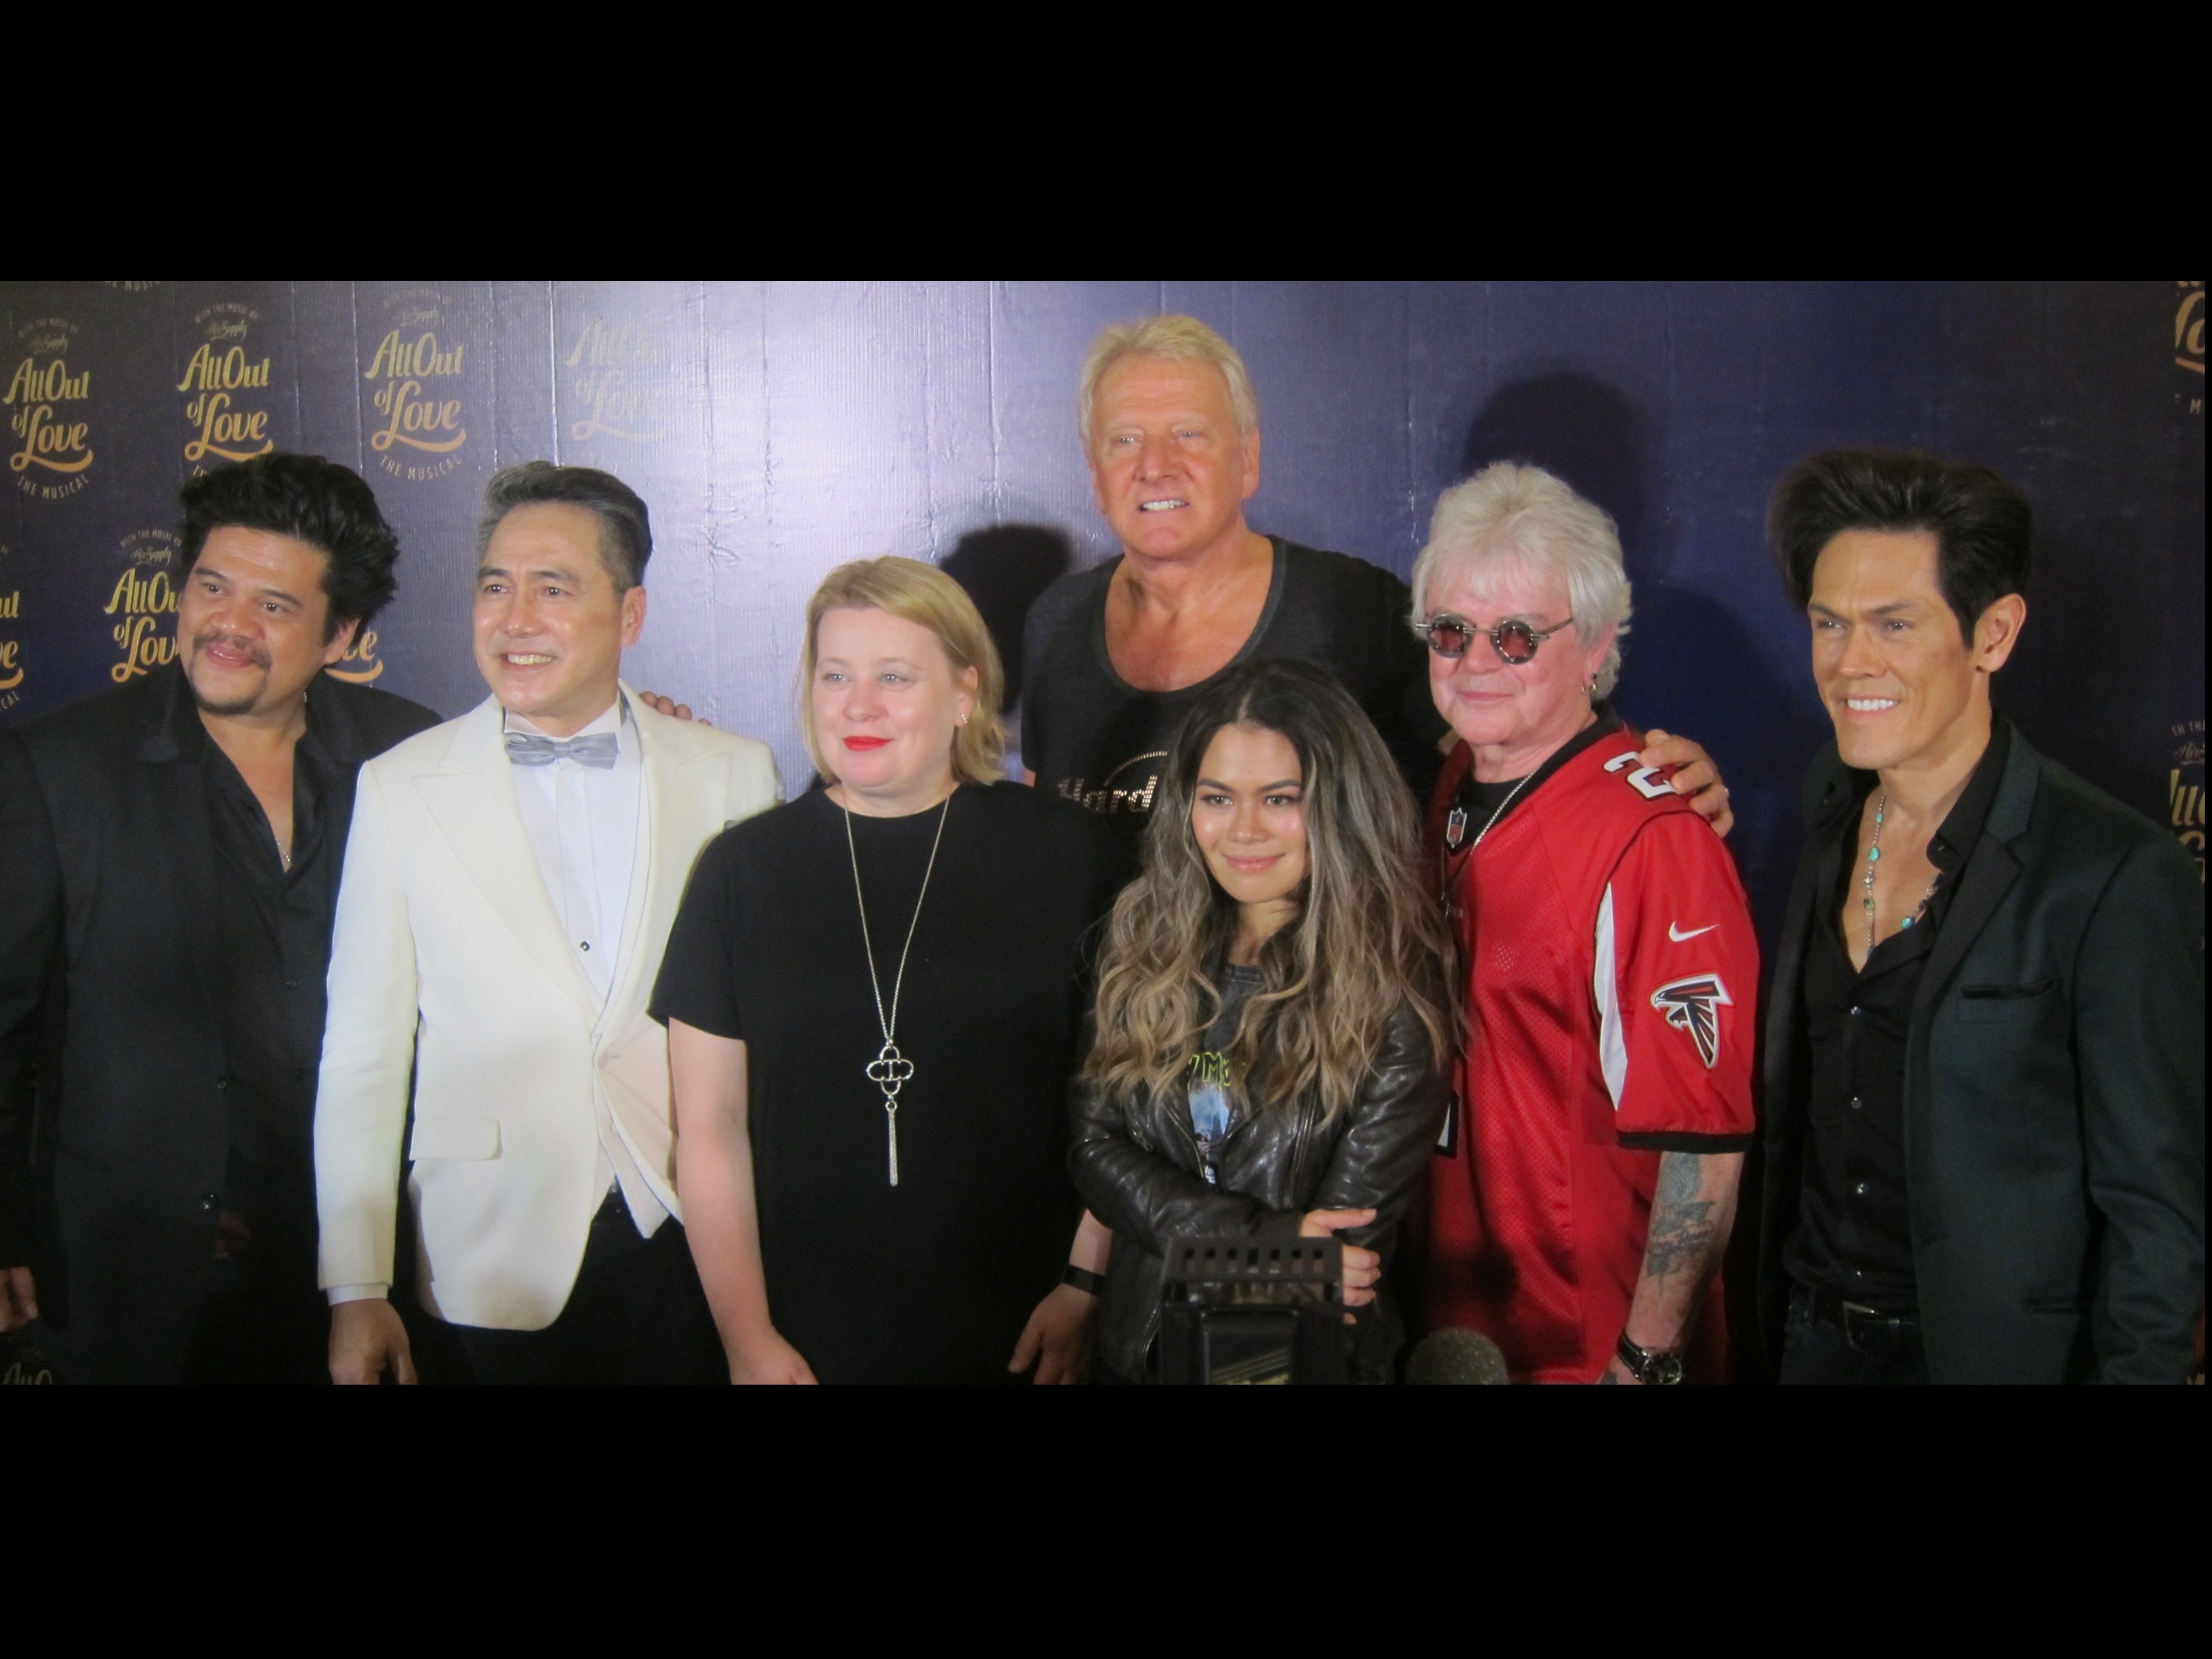 Air Supply’s Graham Russell and Russell Hitchcock (fourth and sixth from left) with Jamie Wilson, Raymund Concepcion, producer Naomi Toohey, Tanya Manalang and MiG Ayesa at the launch of “All Out of Love the Musical.” PHOTO BY FRAN KATIGBAK